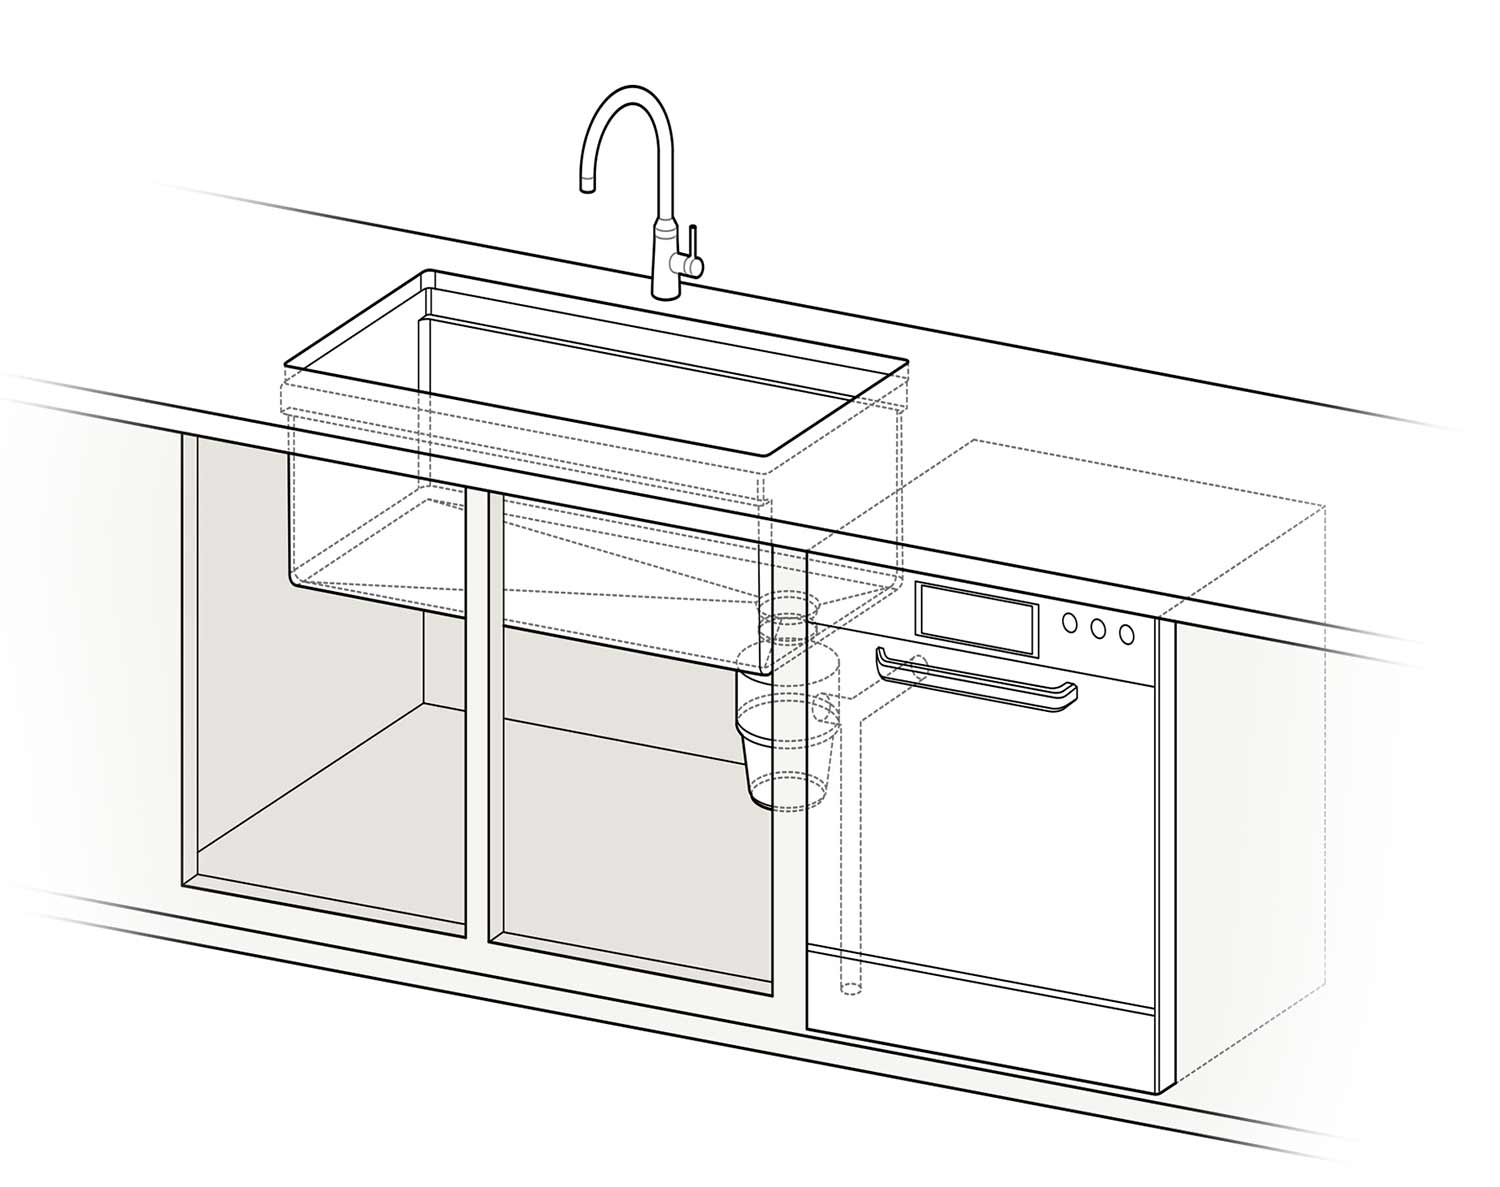 Technical drawing to show the space saving benefits of an offset drain kitchen sink